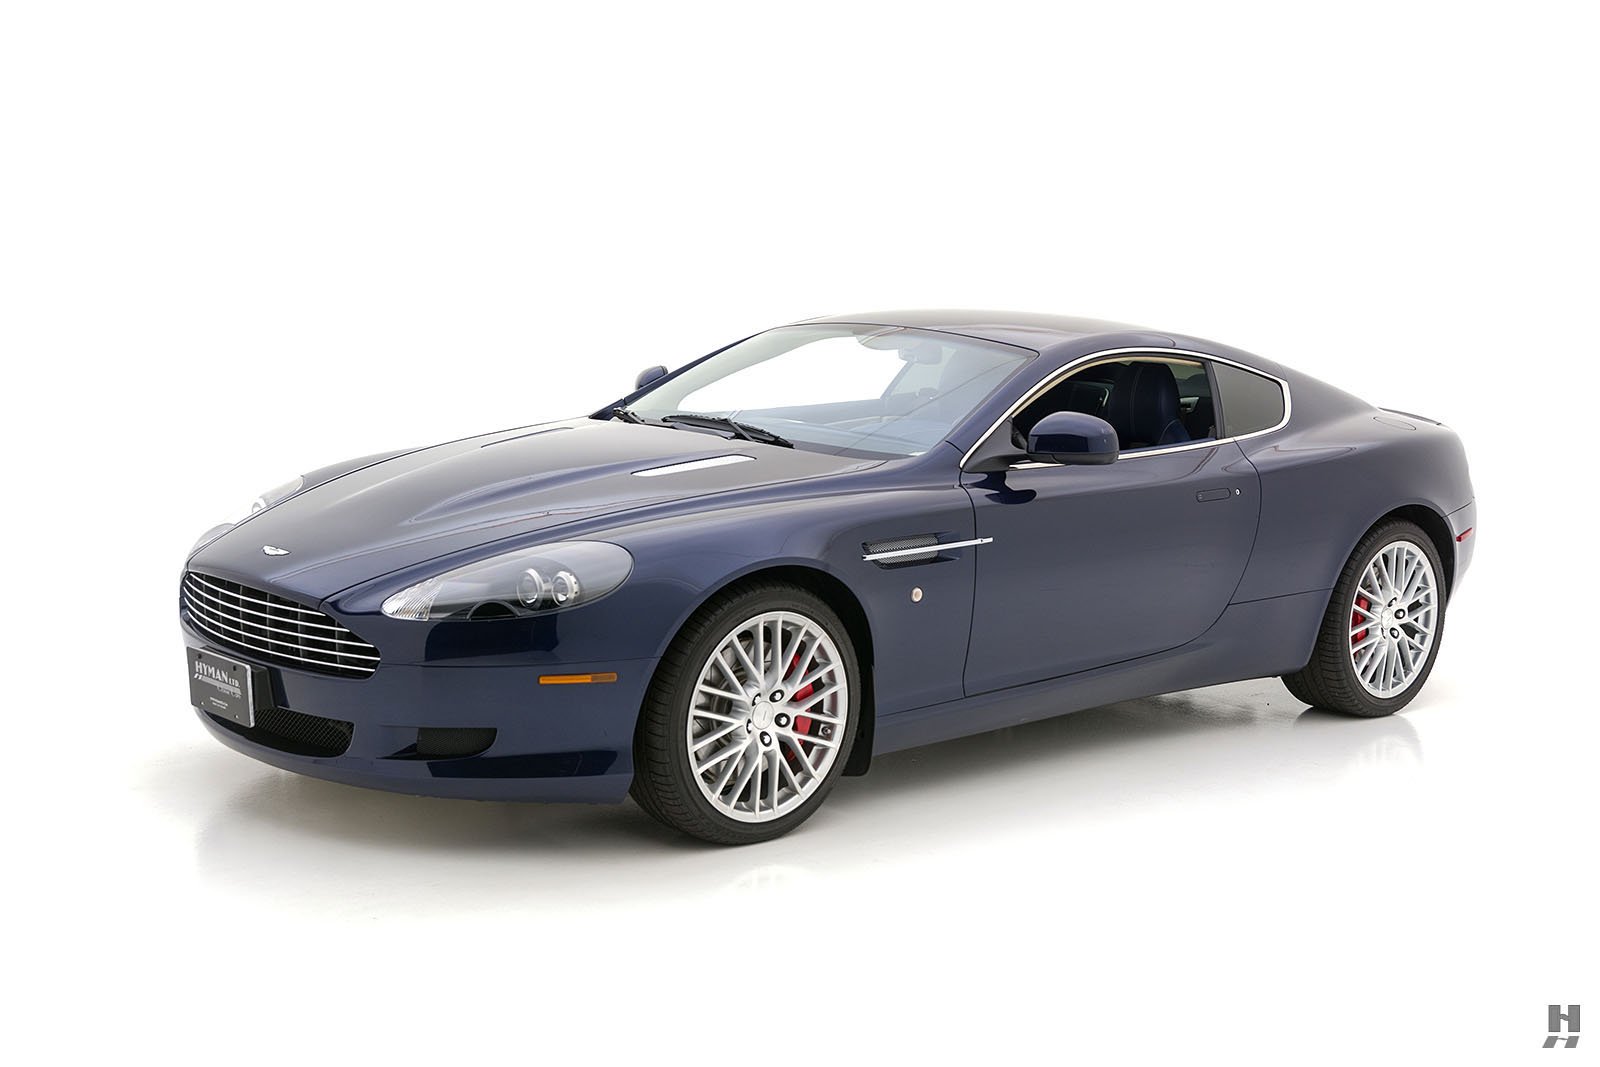 2010 Aston Martin DB9 For Sale | Vintage Driving Machines